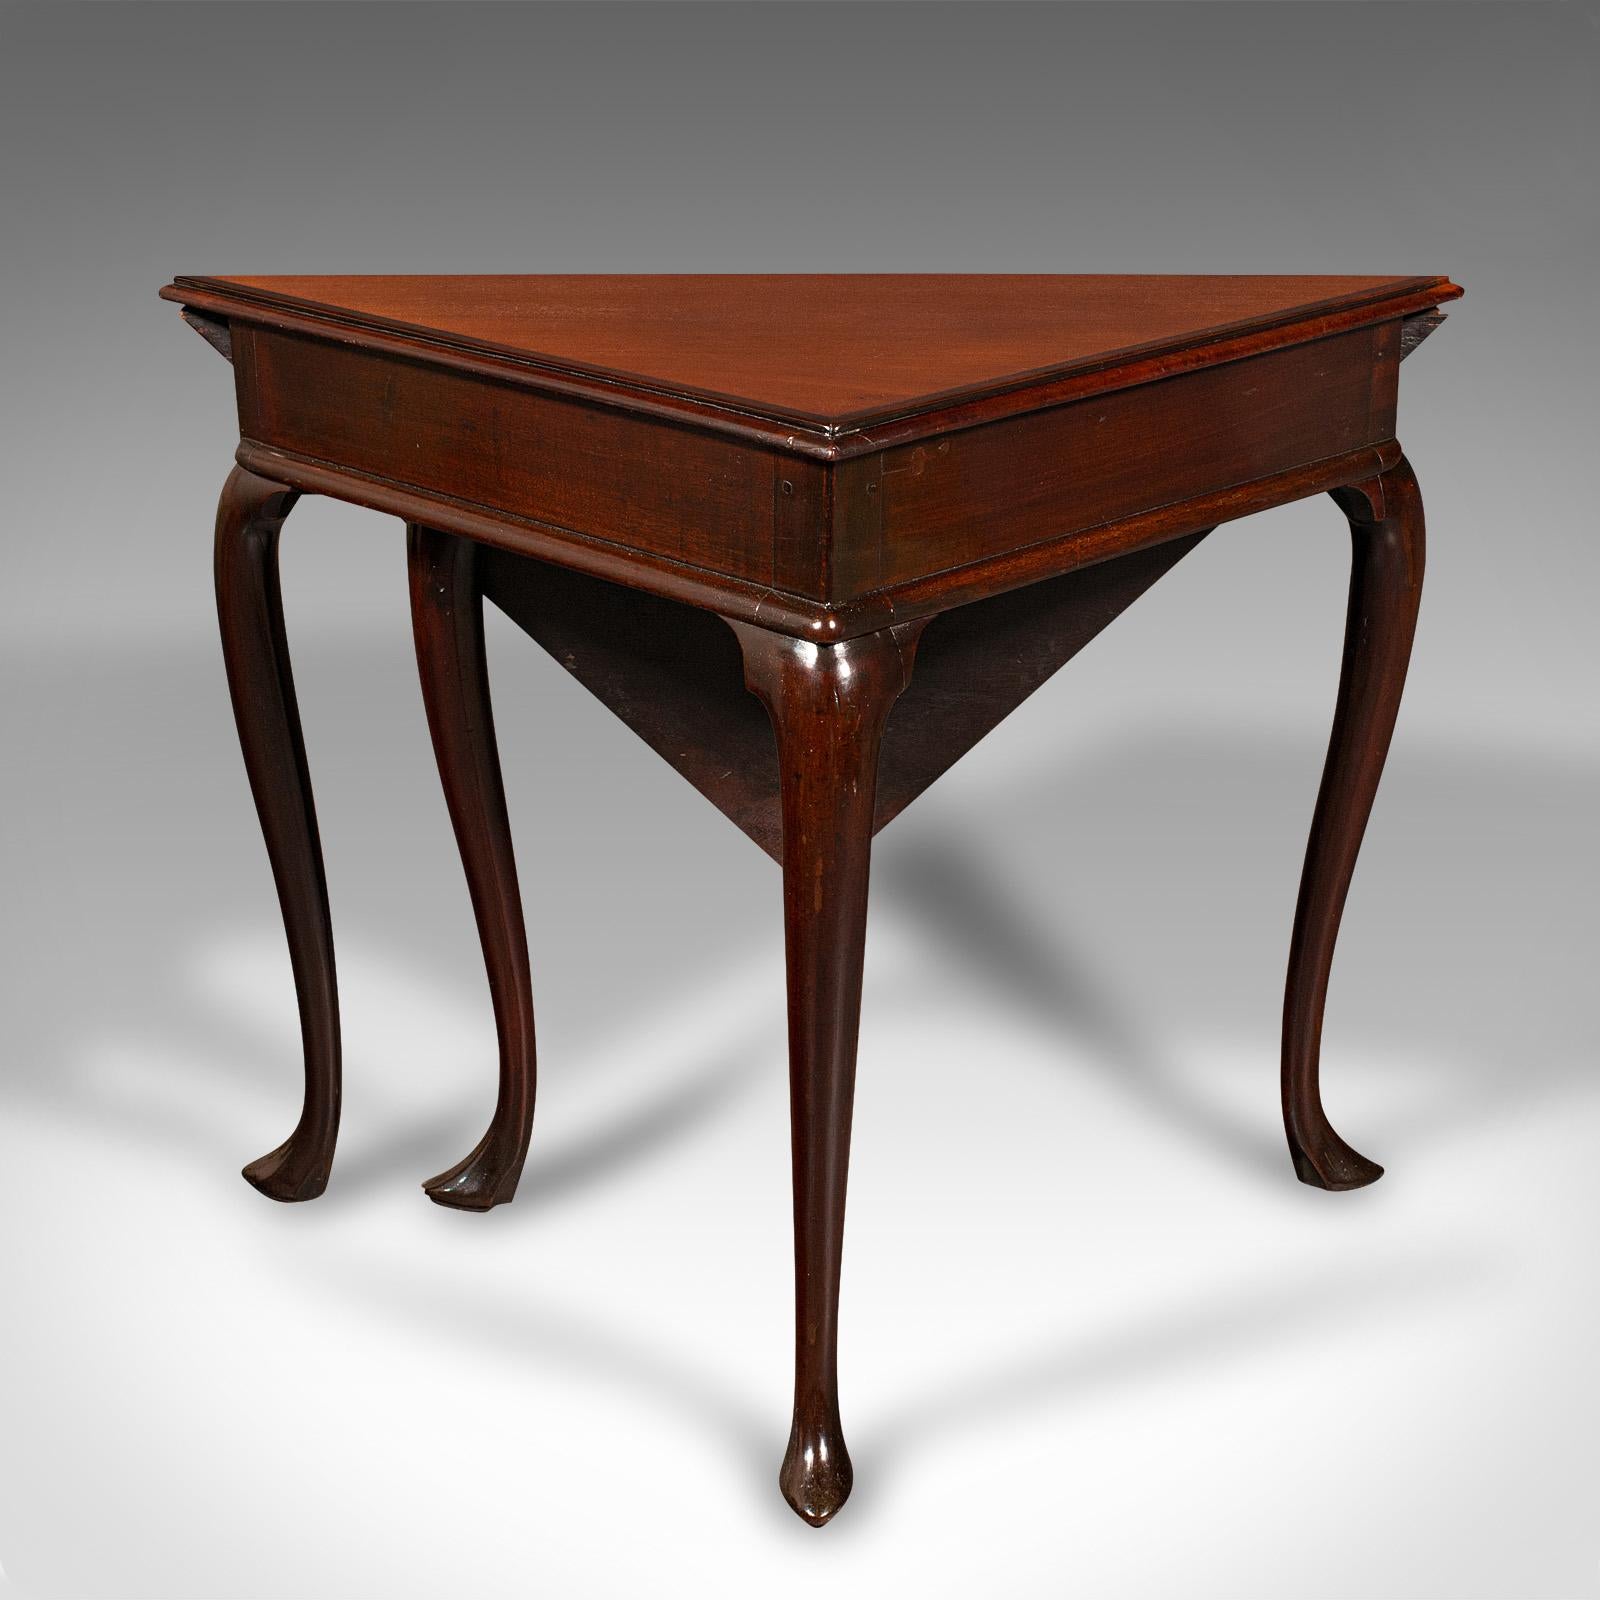 British Antique Supper Table, English, Folding, Occasional, Display, Georgian, C.1770 For Sale